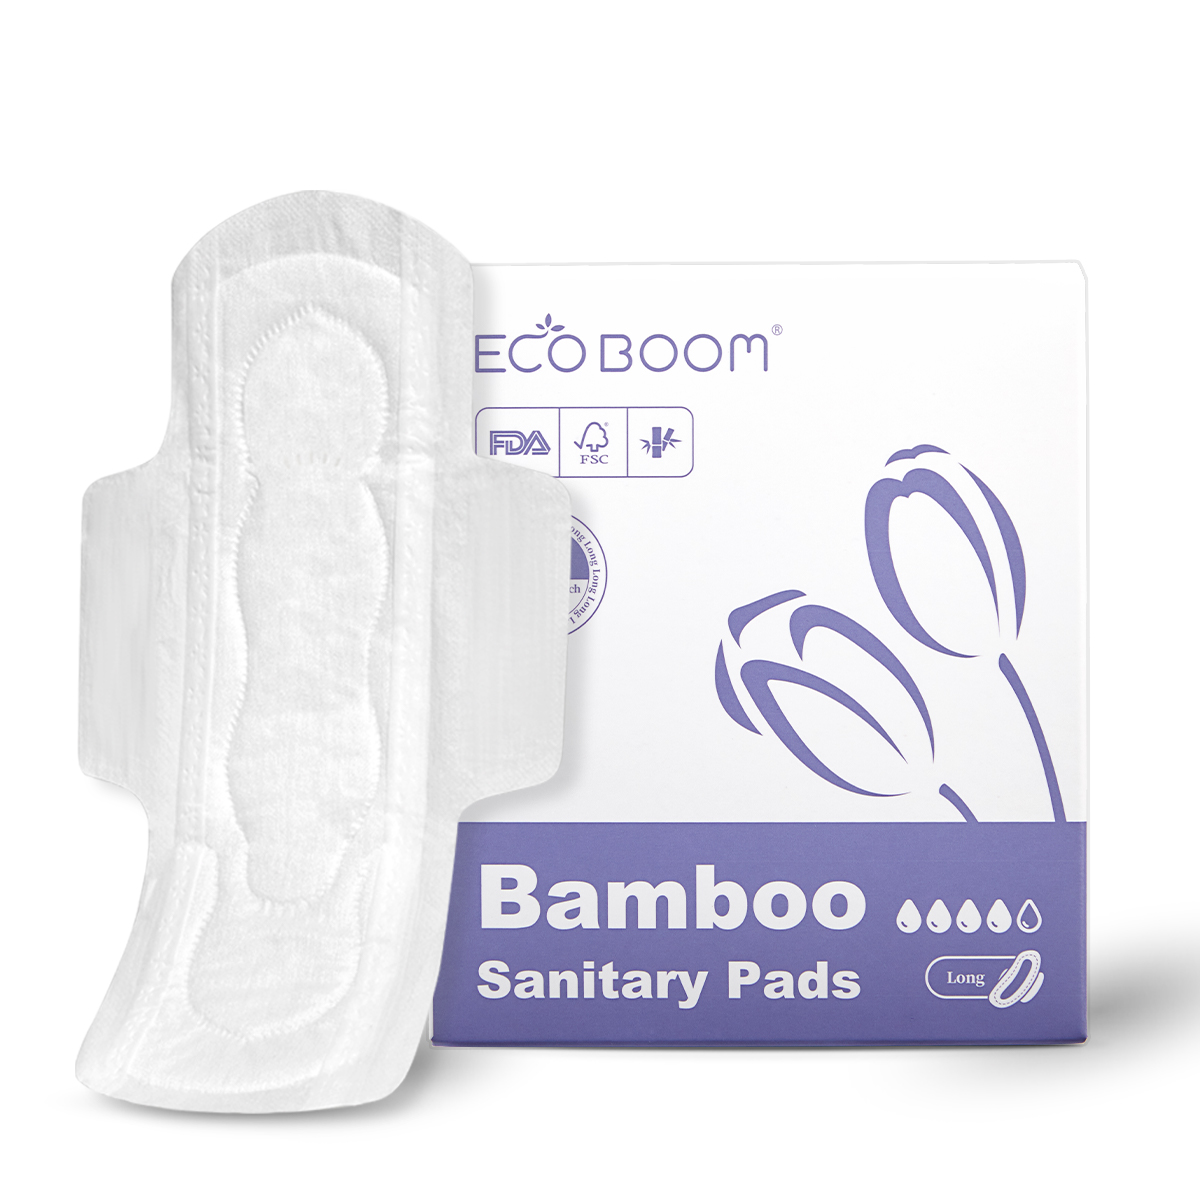 Ecoboom bamboo charcoal sanitary pads factory-2